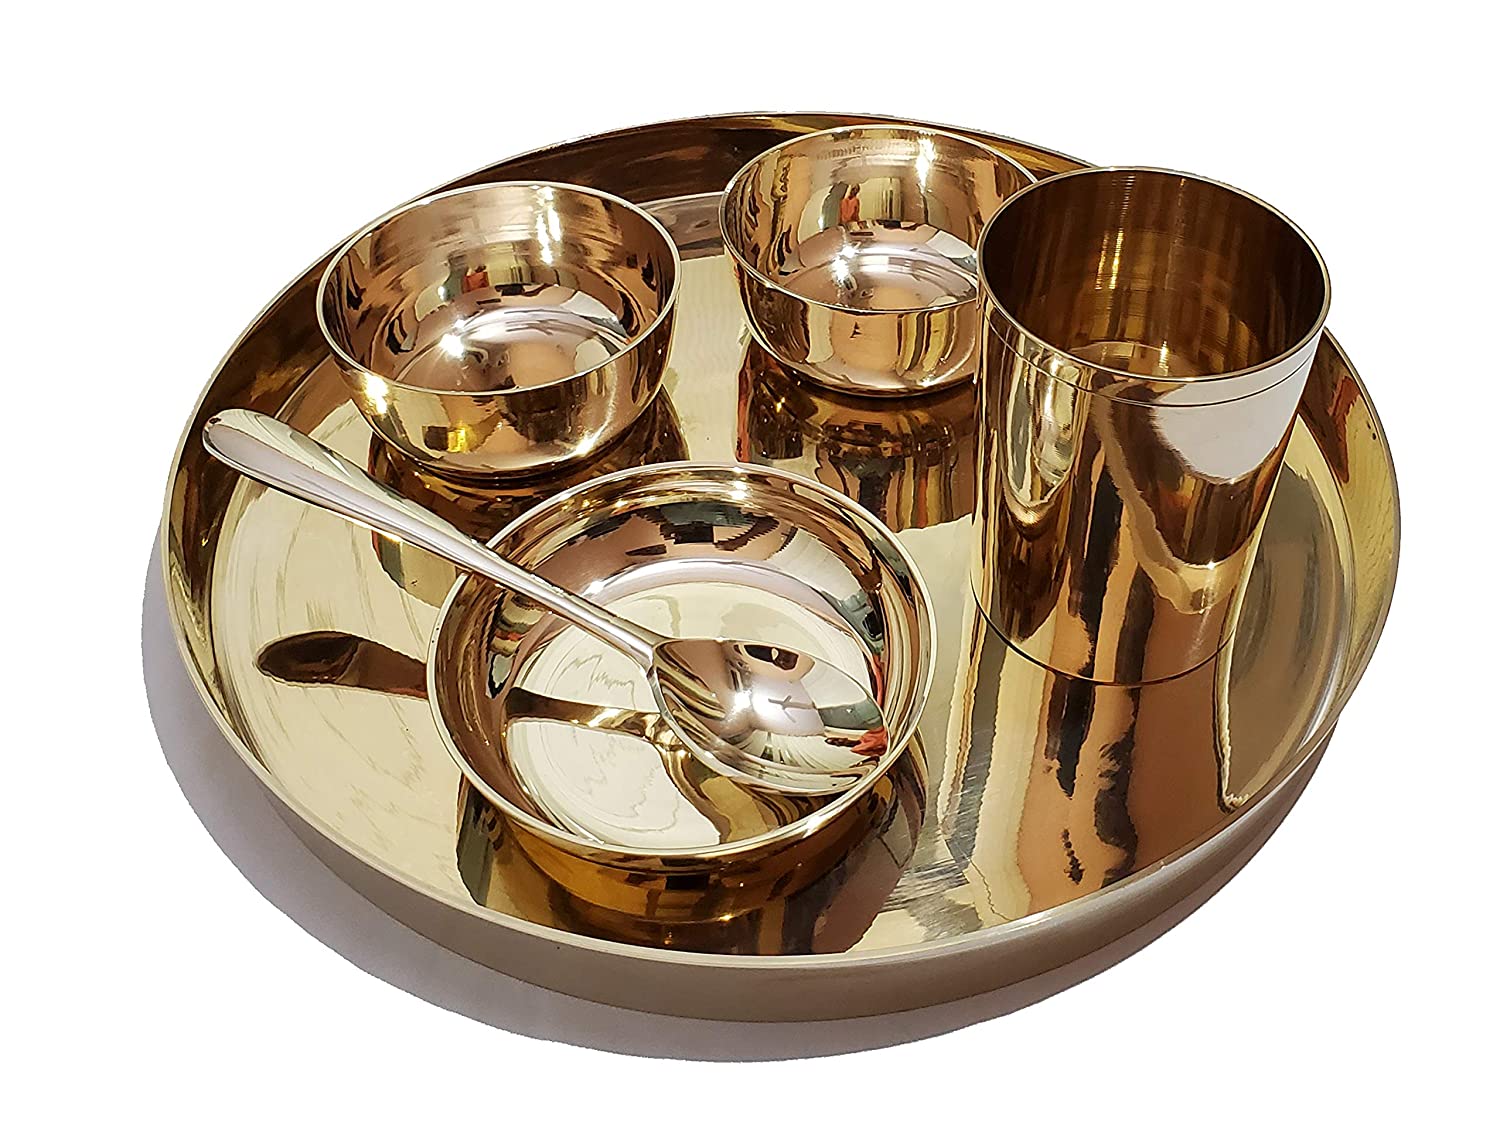 Indian Traditional Pure Brass Hammered Design 7 Pieces Dinner Set Gold